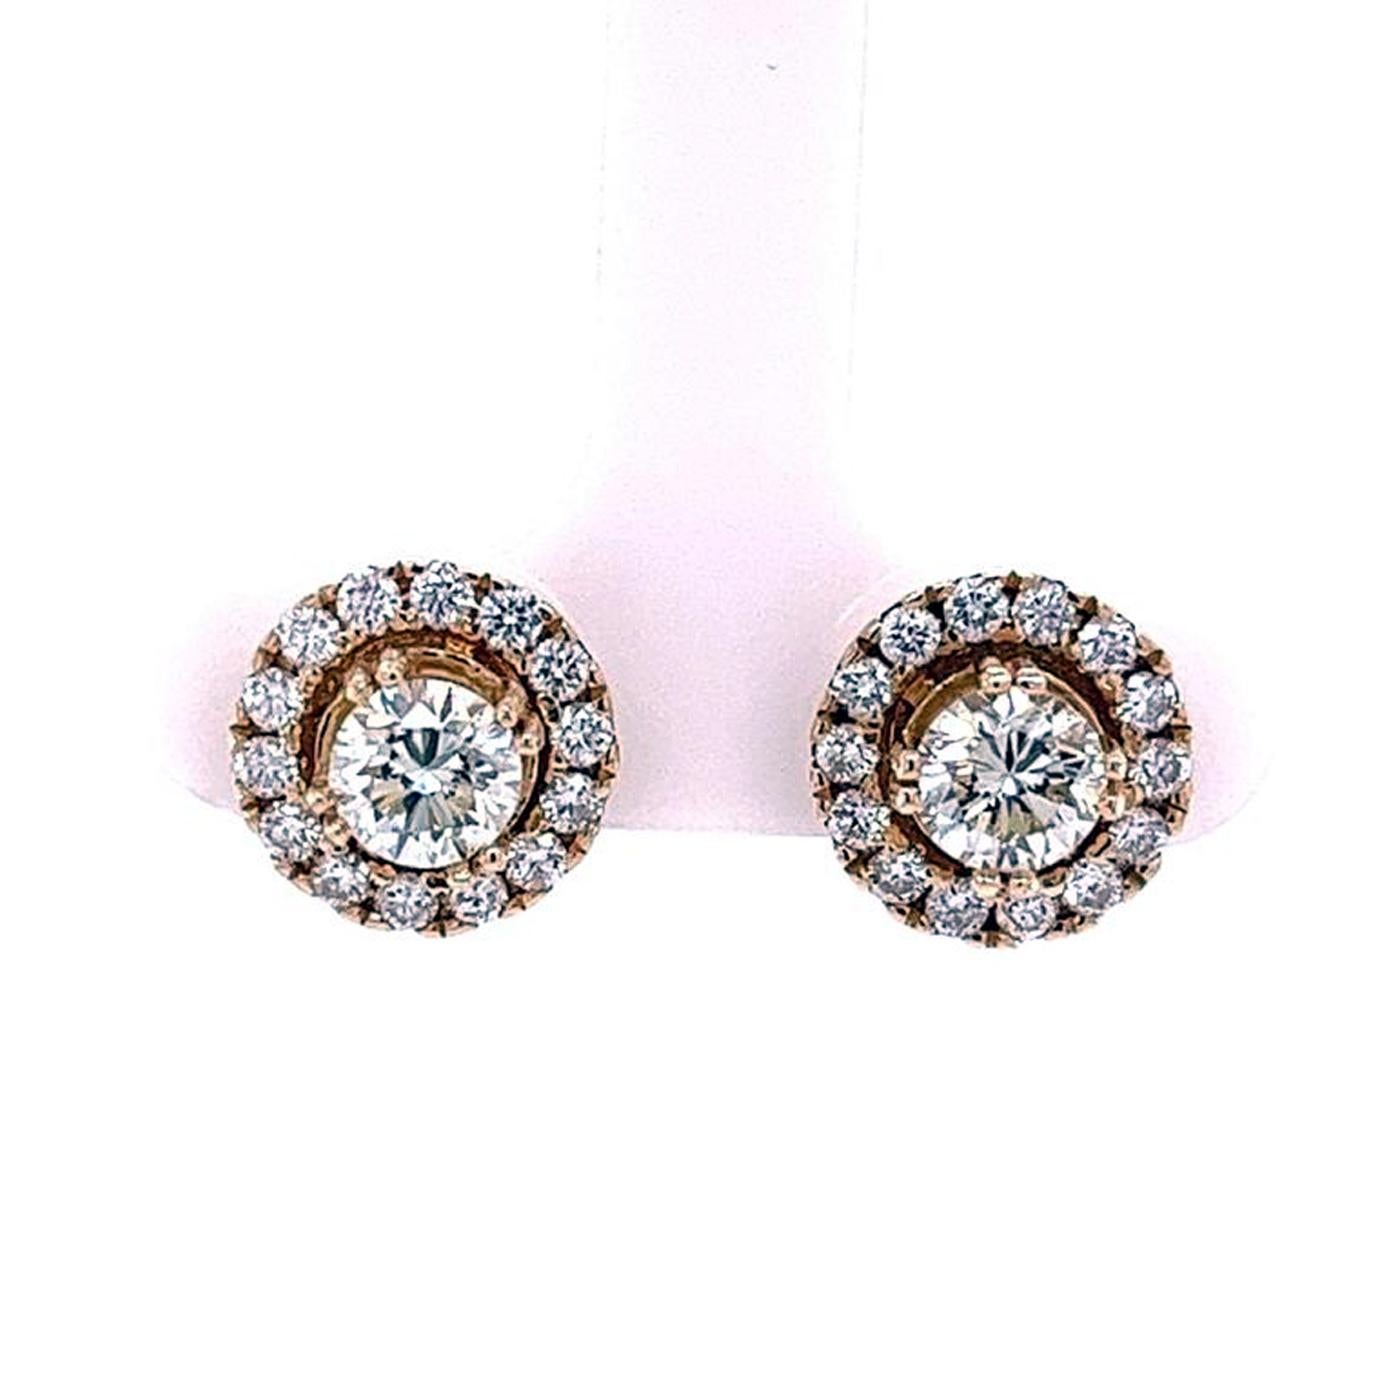 These Gorgeous Natural Round Diamond earrings offer beauty equaled only to her own. This fashionable and classic matching pair of Round Natural Diamond Earrings features Round-cut diamonds. with J Color, and SI1-VS2 Clarity. These earrings feature a